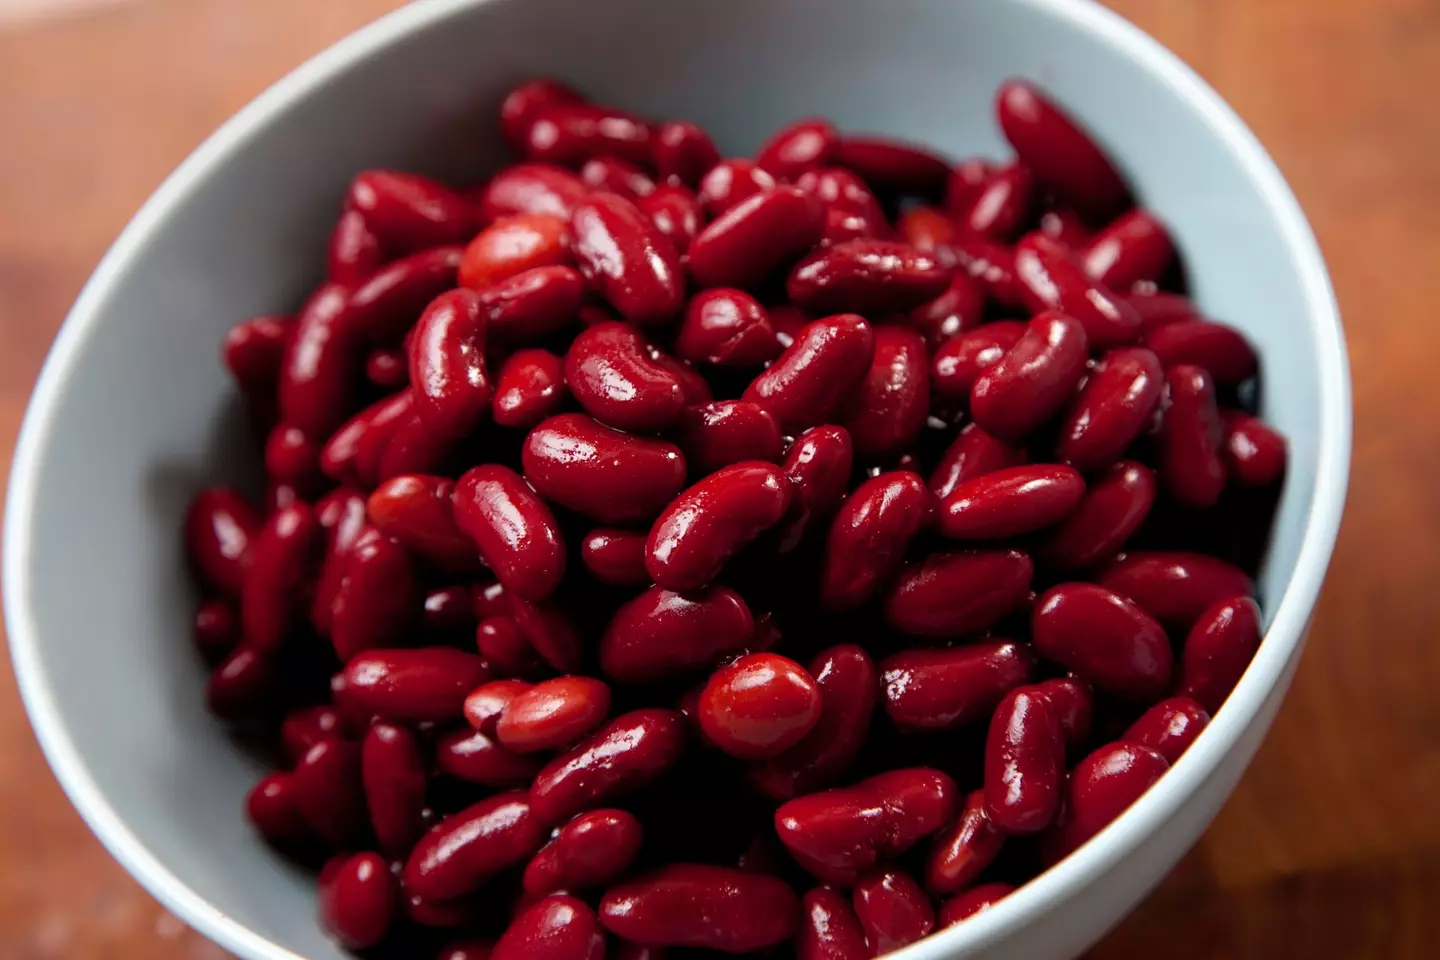 People are using kidney beans to see if anyone is home (